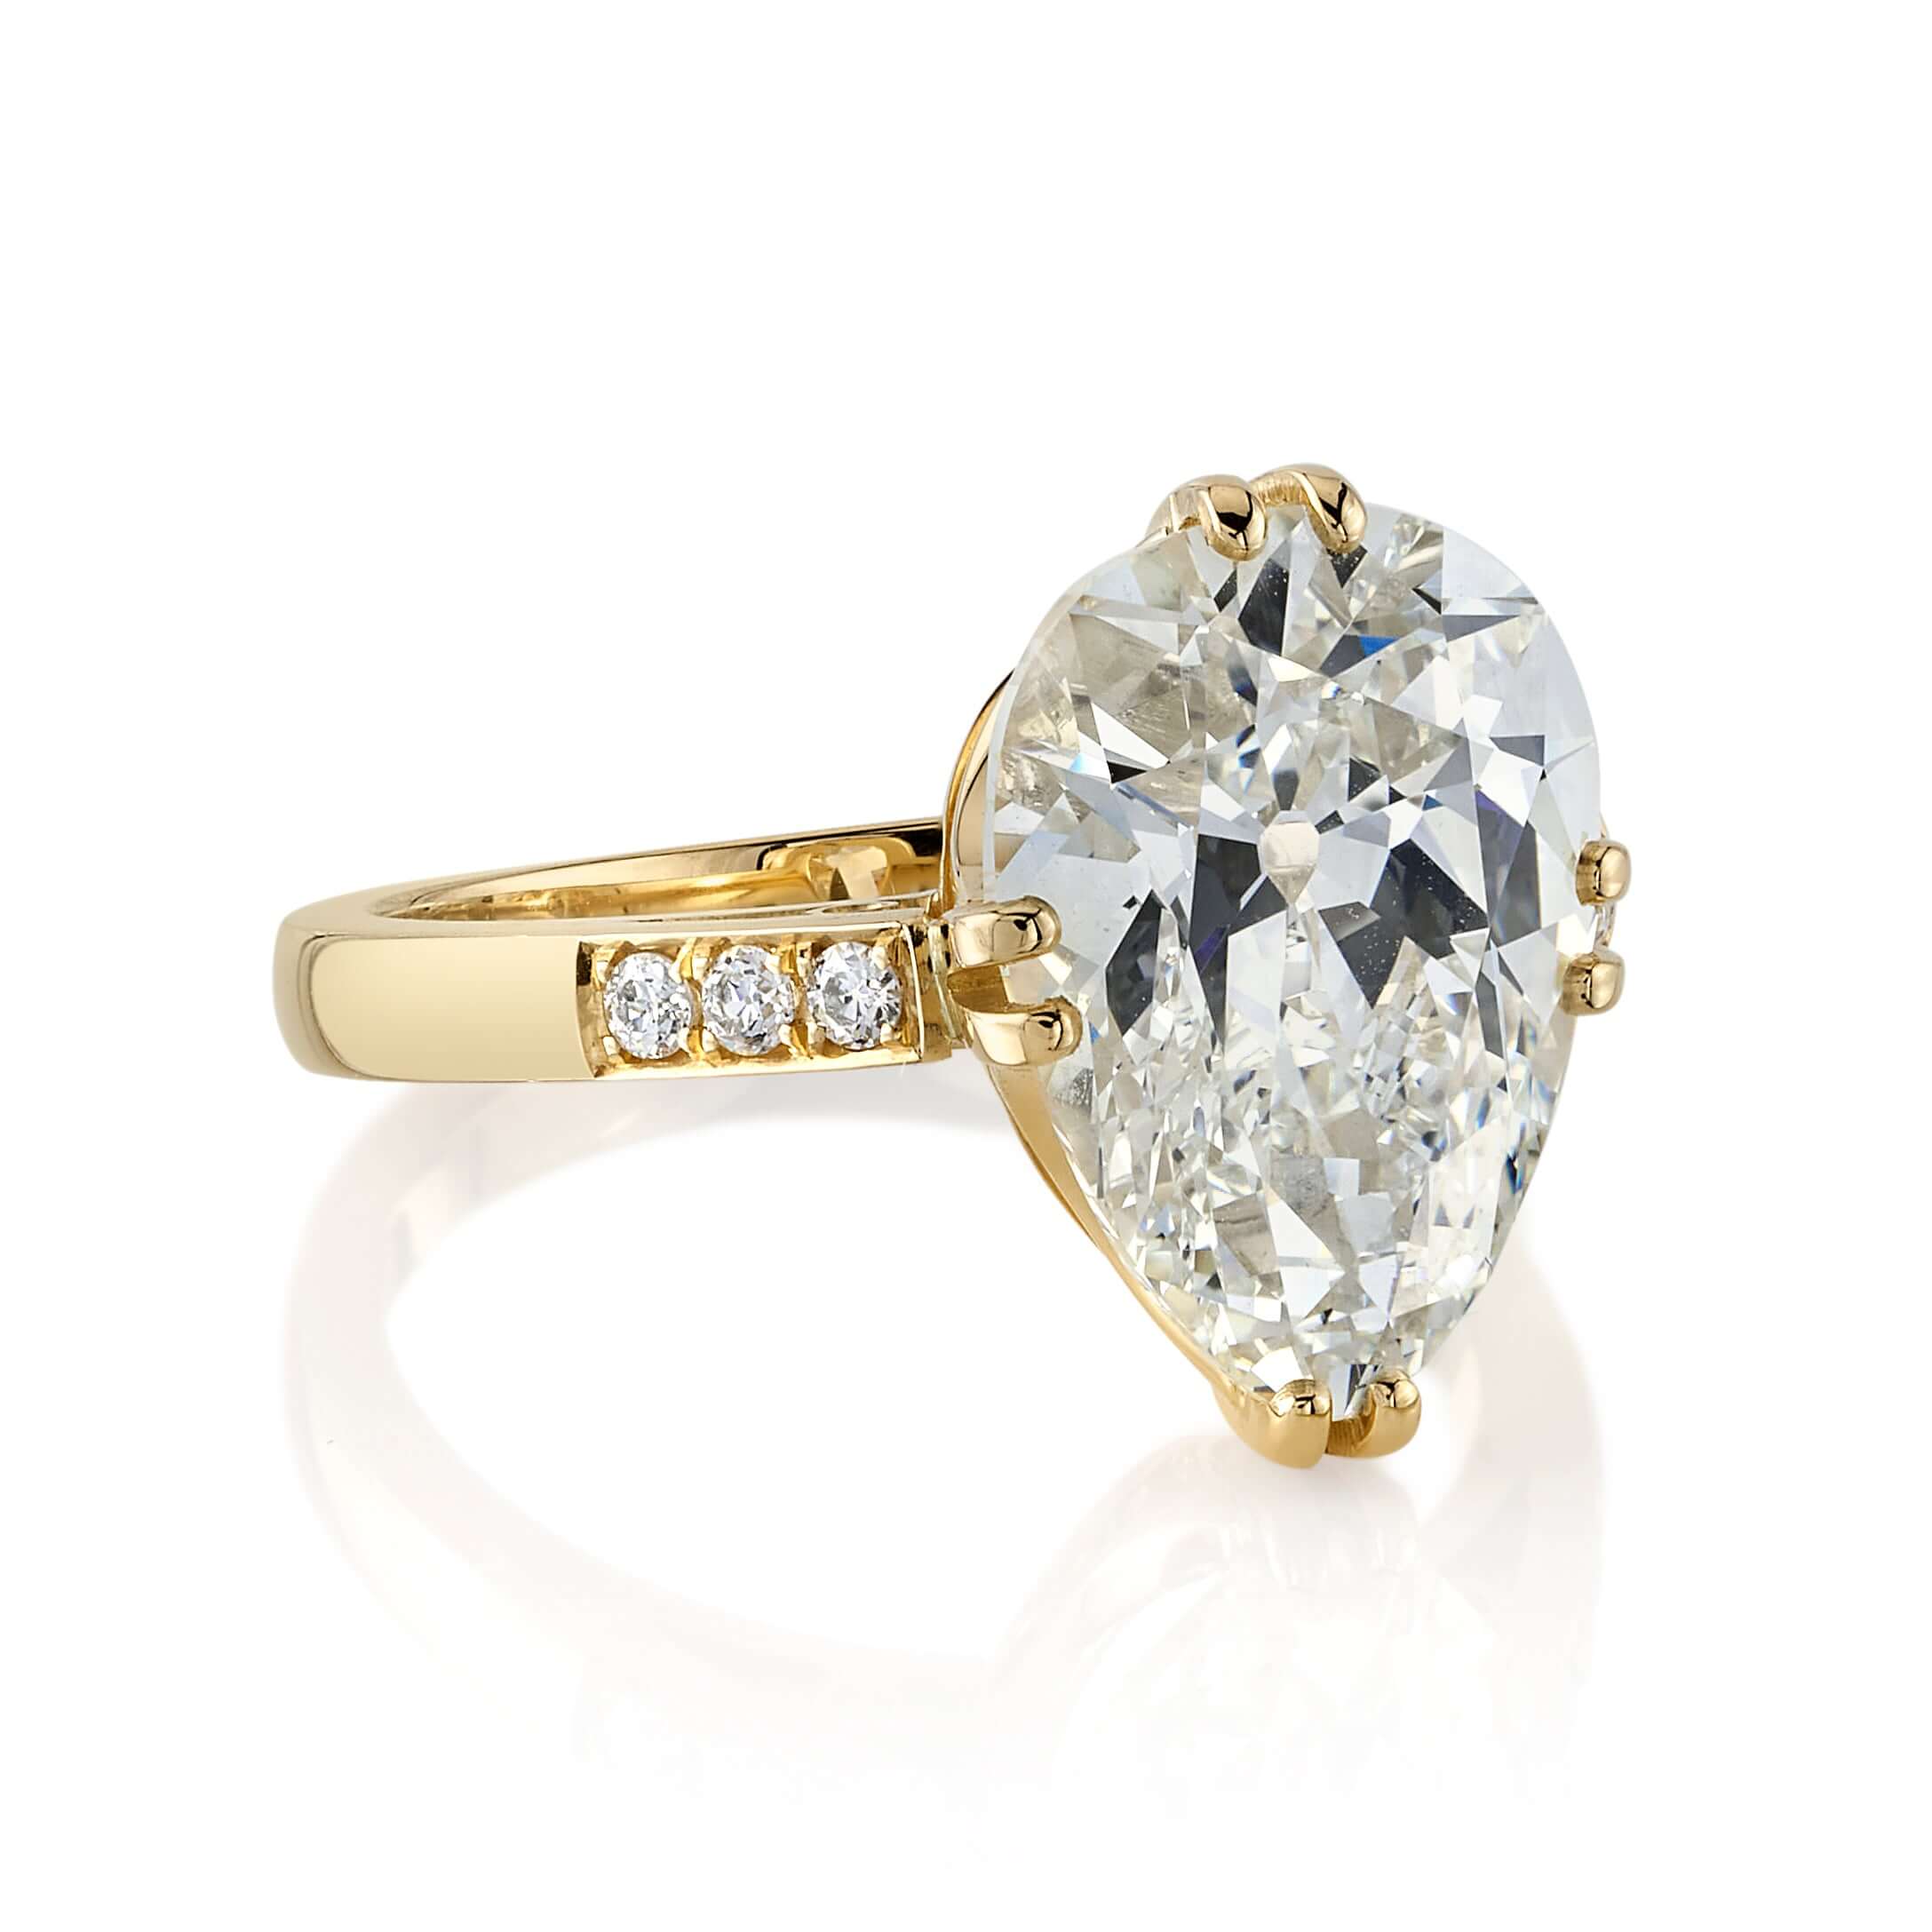 SINGLE STONE BAUER RING featuring 5.00ct L/VVS1 GIA certified antique pear shaped diamond with 0.11ctw old European cut accent diamonds set in a handcrafted 18K yellow gold mounting.